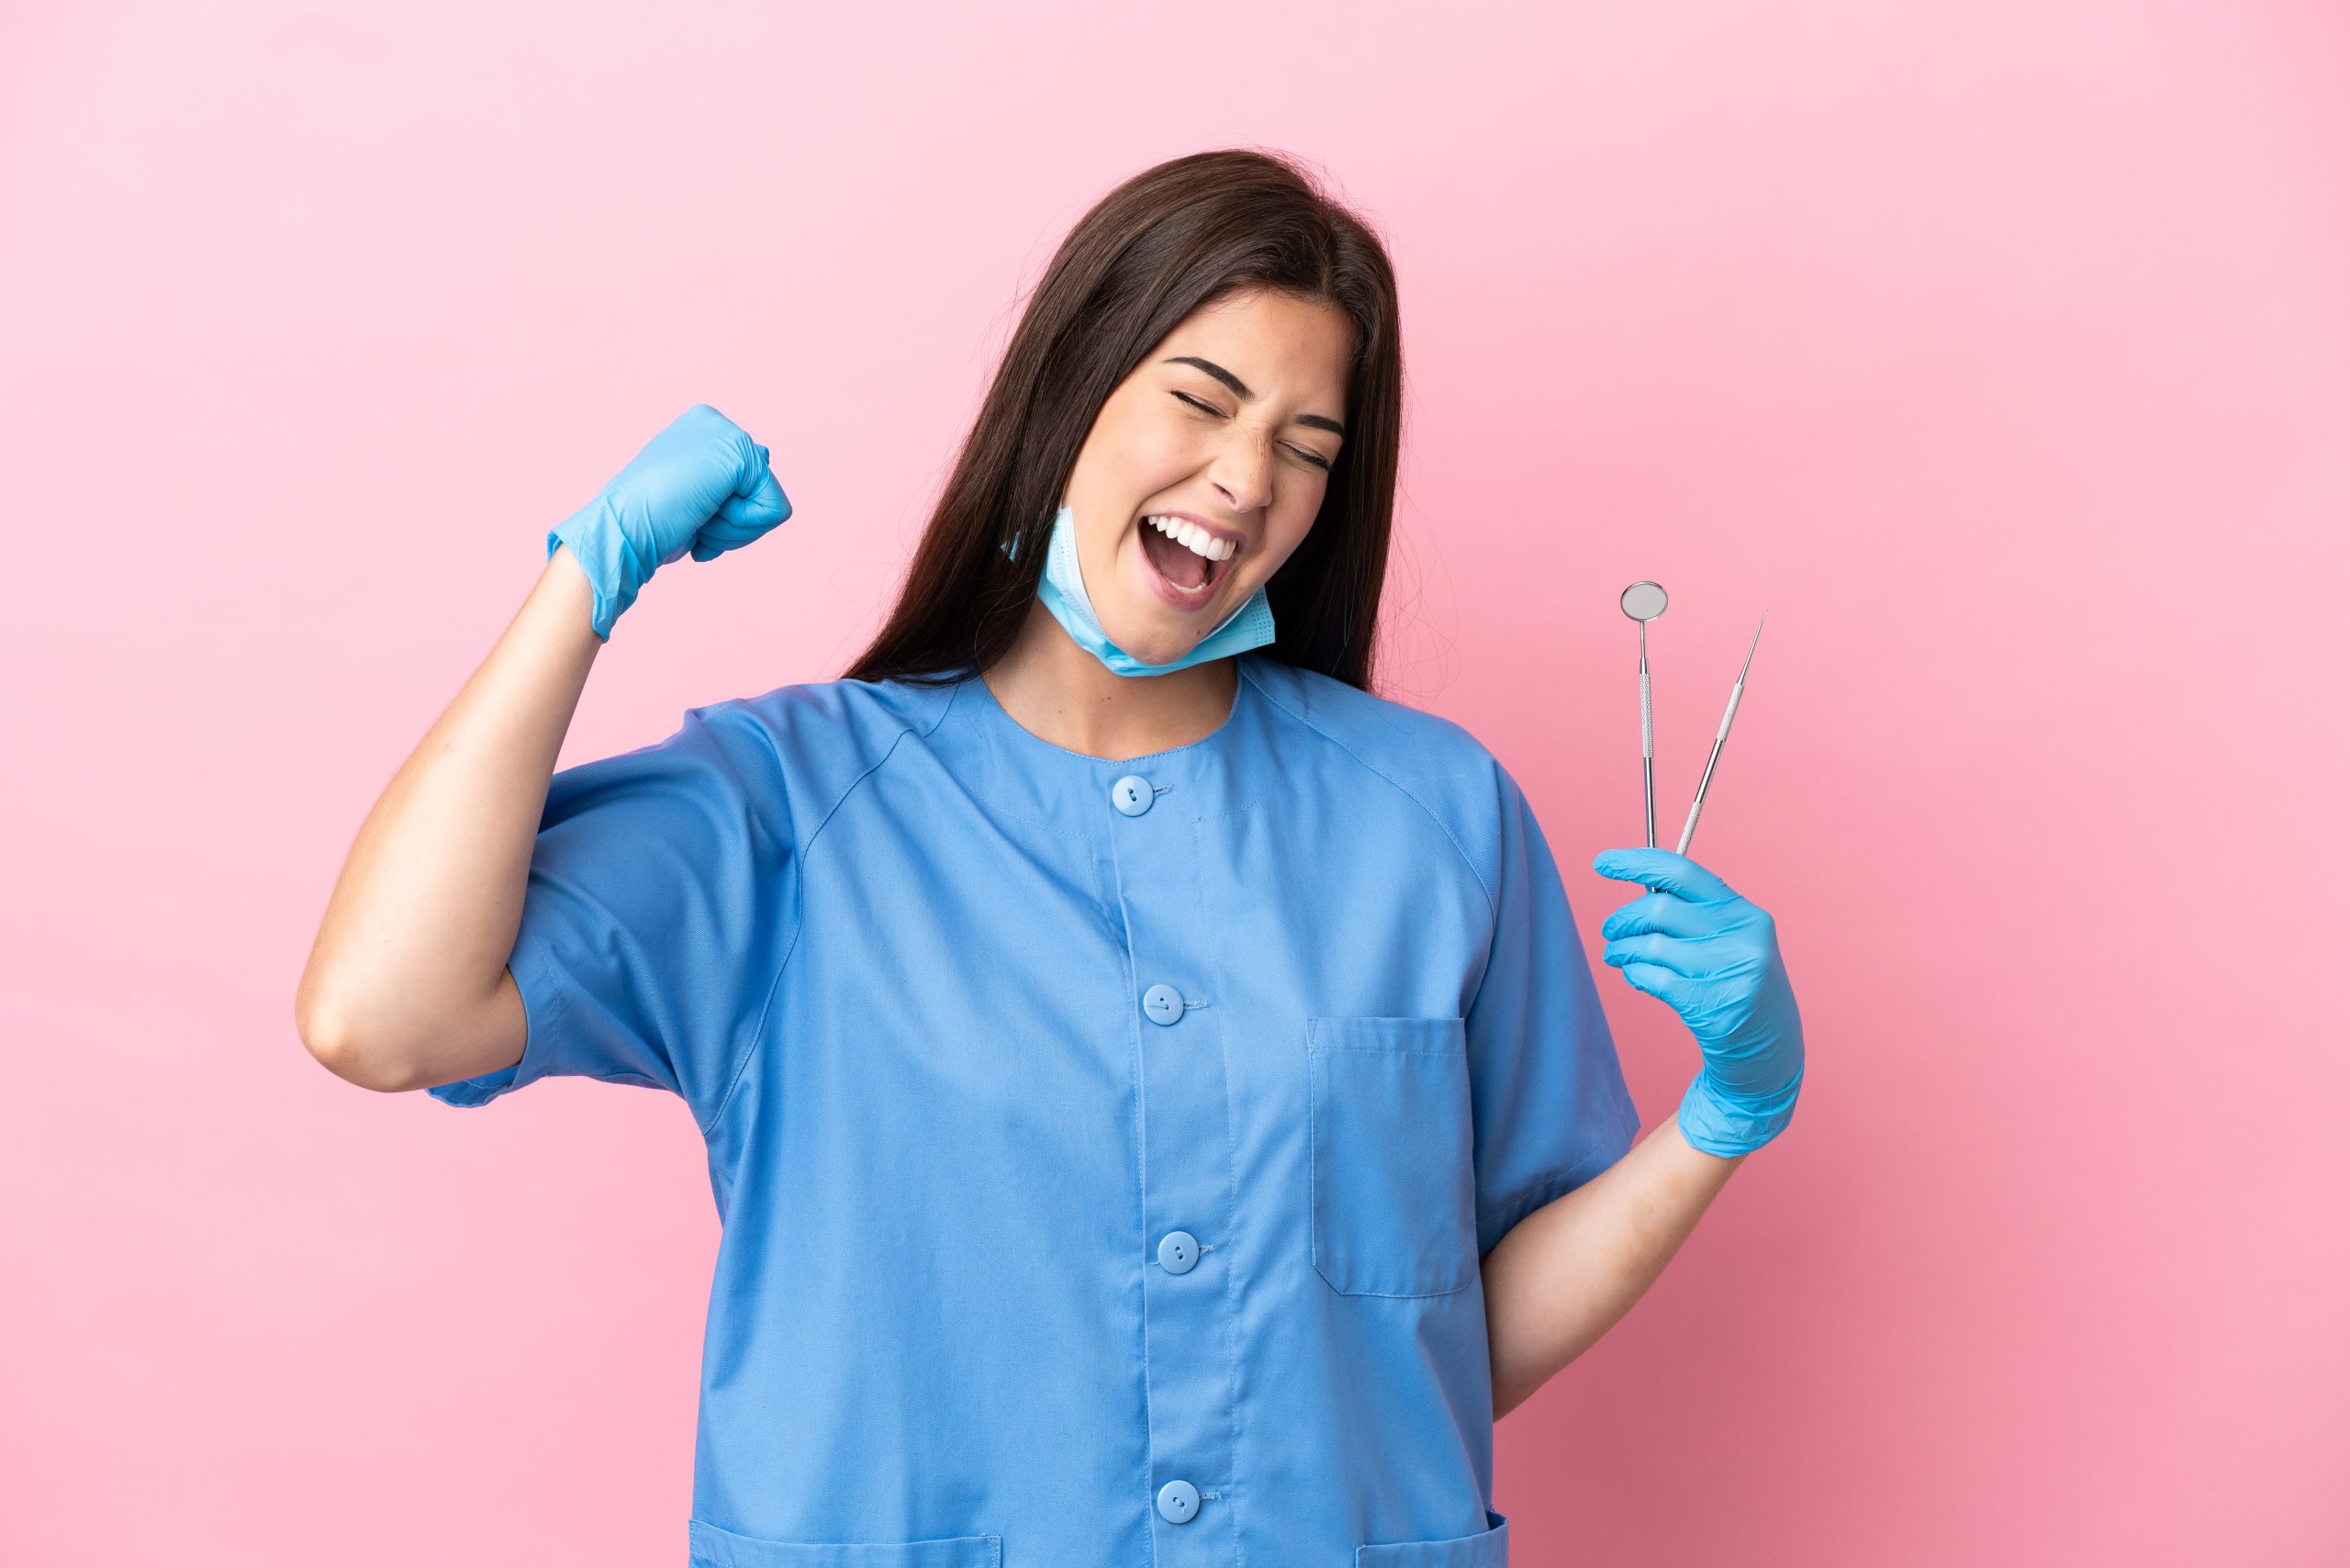 Dentist Woman Holding Tools Isolated On Pink Background Celebrating A Victory